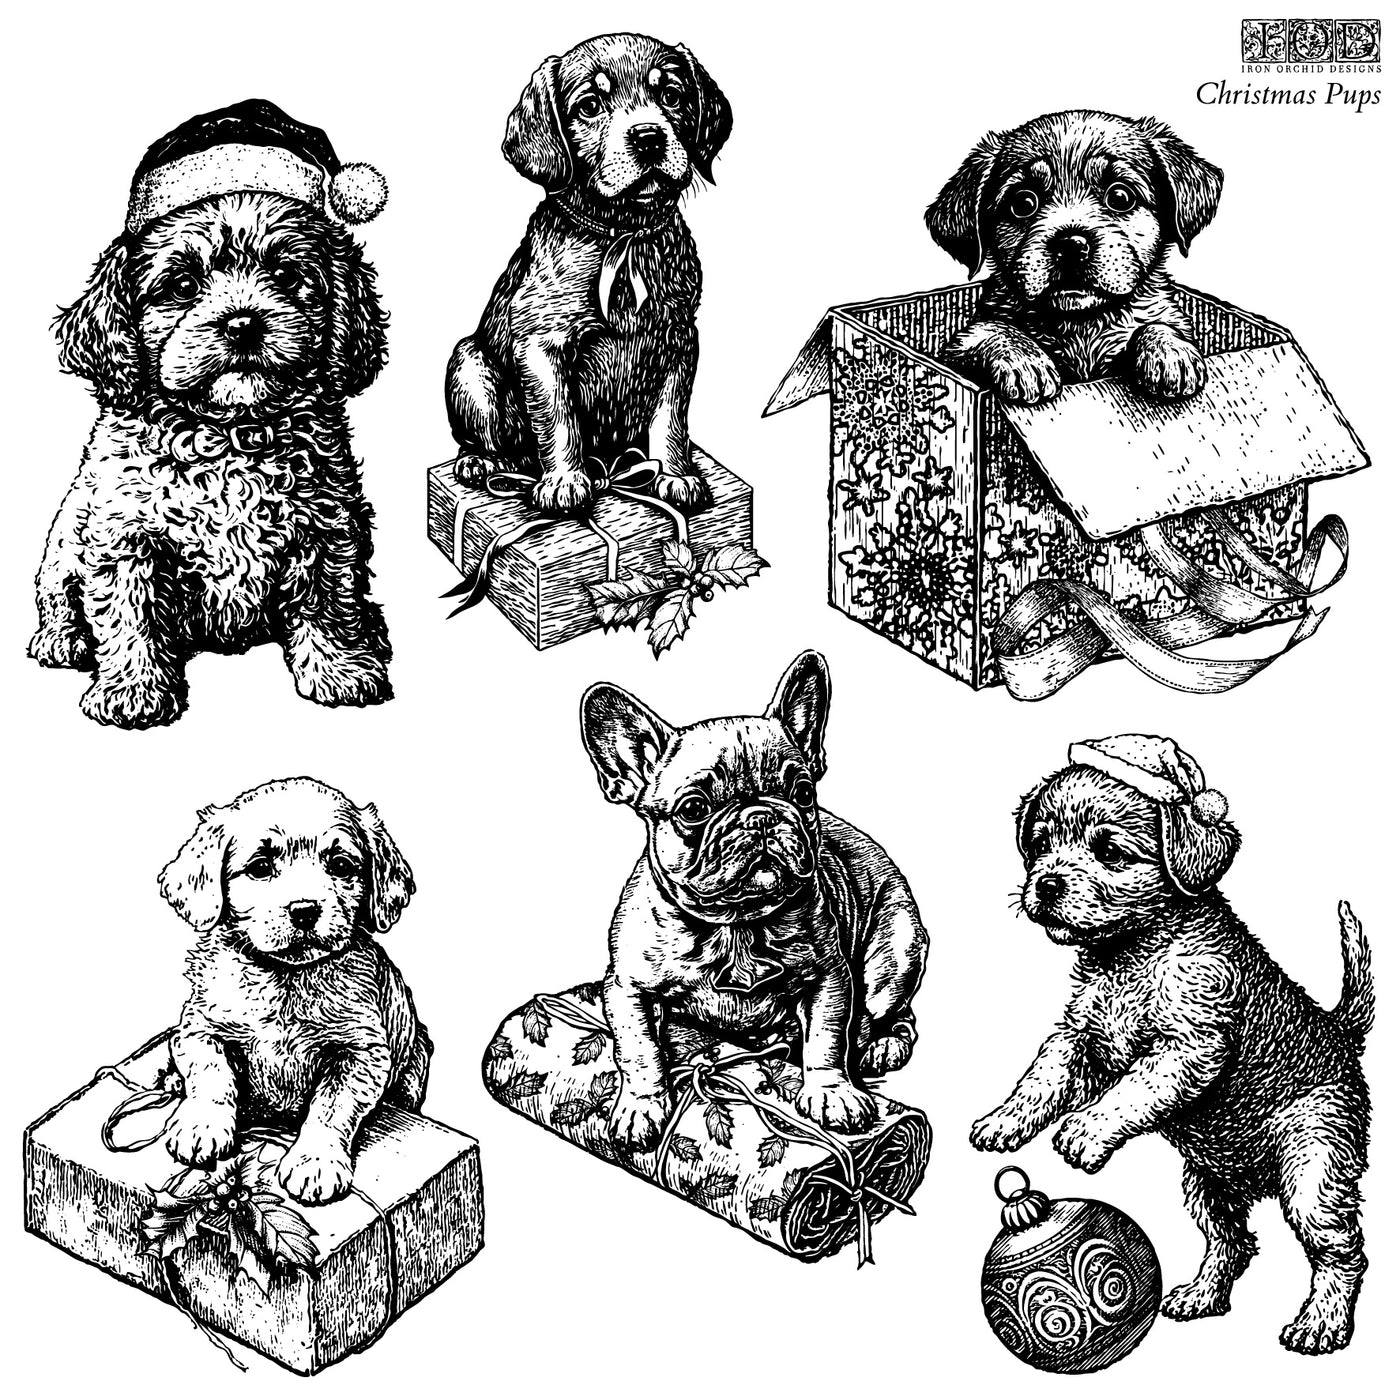 Christmas Pups (Limited Edition)